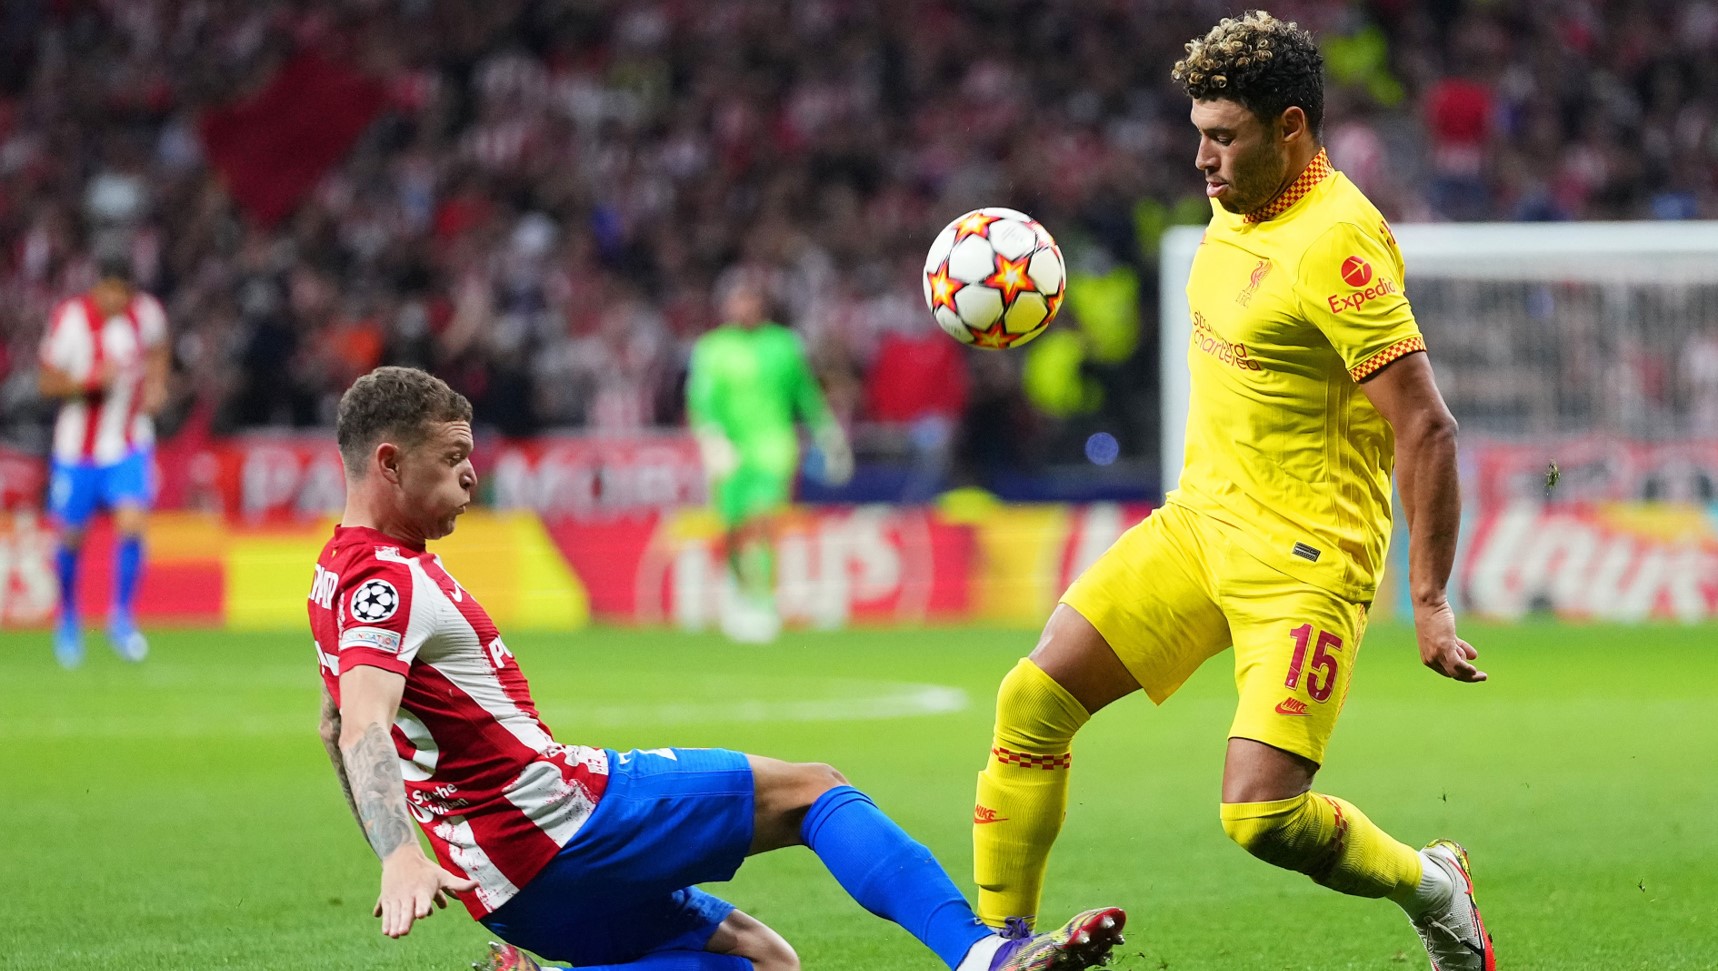 Atletico’s Trippier labels Liverpool ‘unbelievable’ and ‘feels sorry’ for Griezmann after UCL red card